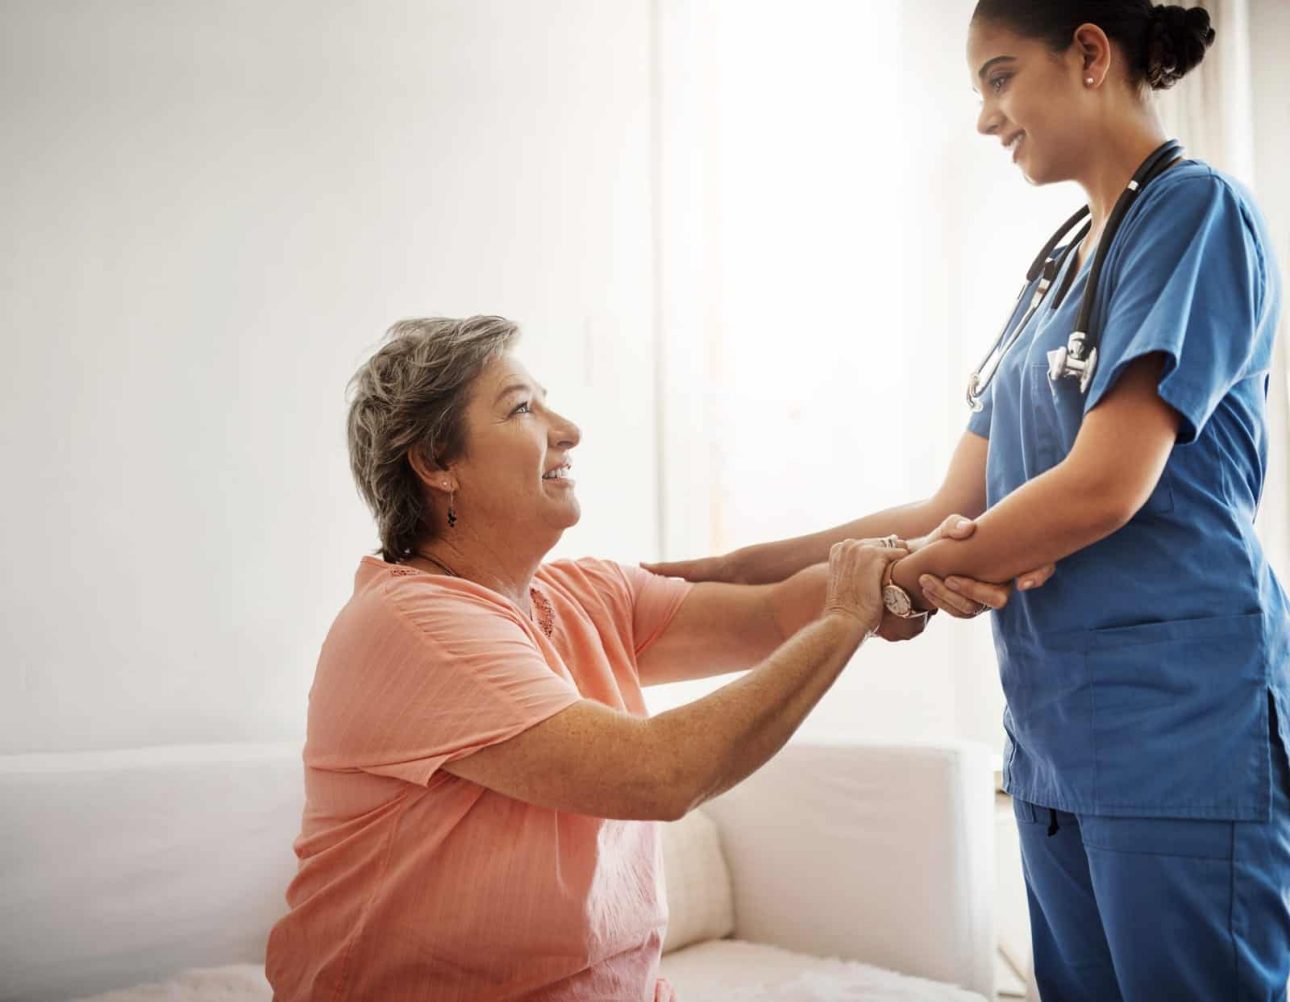 Caregivers must be also monitor and take care of themselves to provide 100% care to their loved ones.